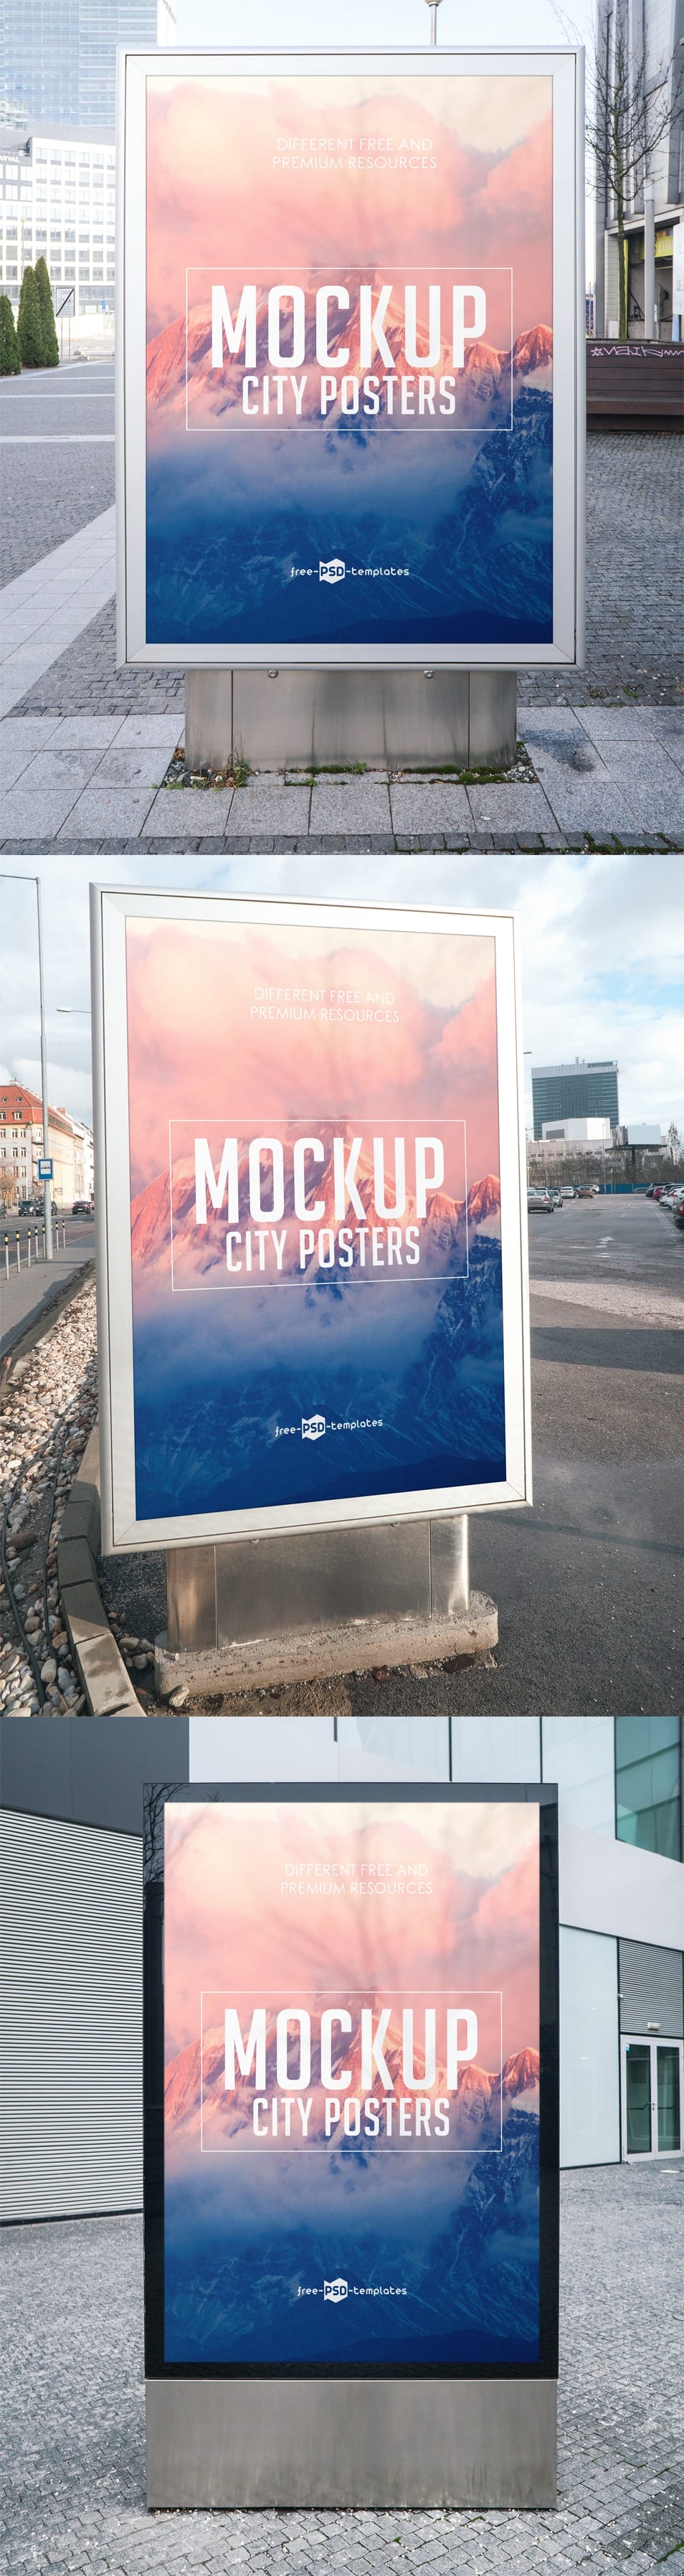 3 Free City Posters Mock-ups in PSD